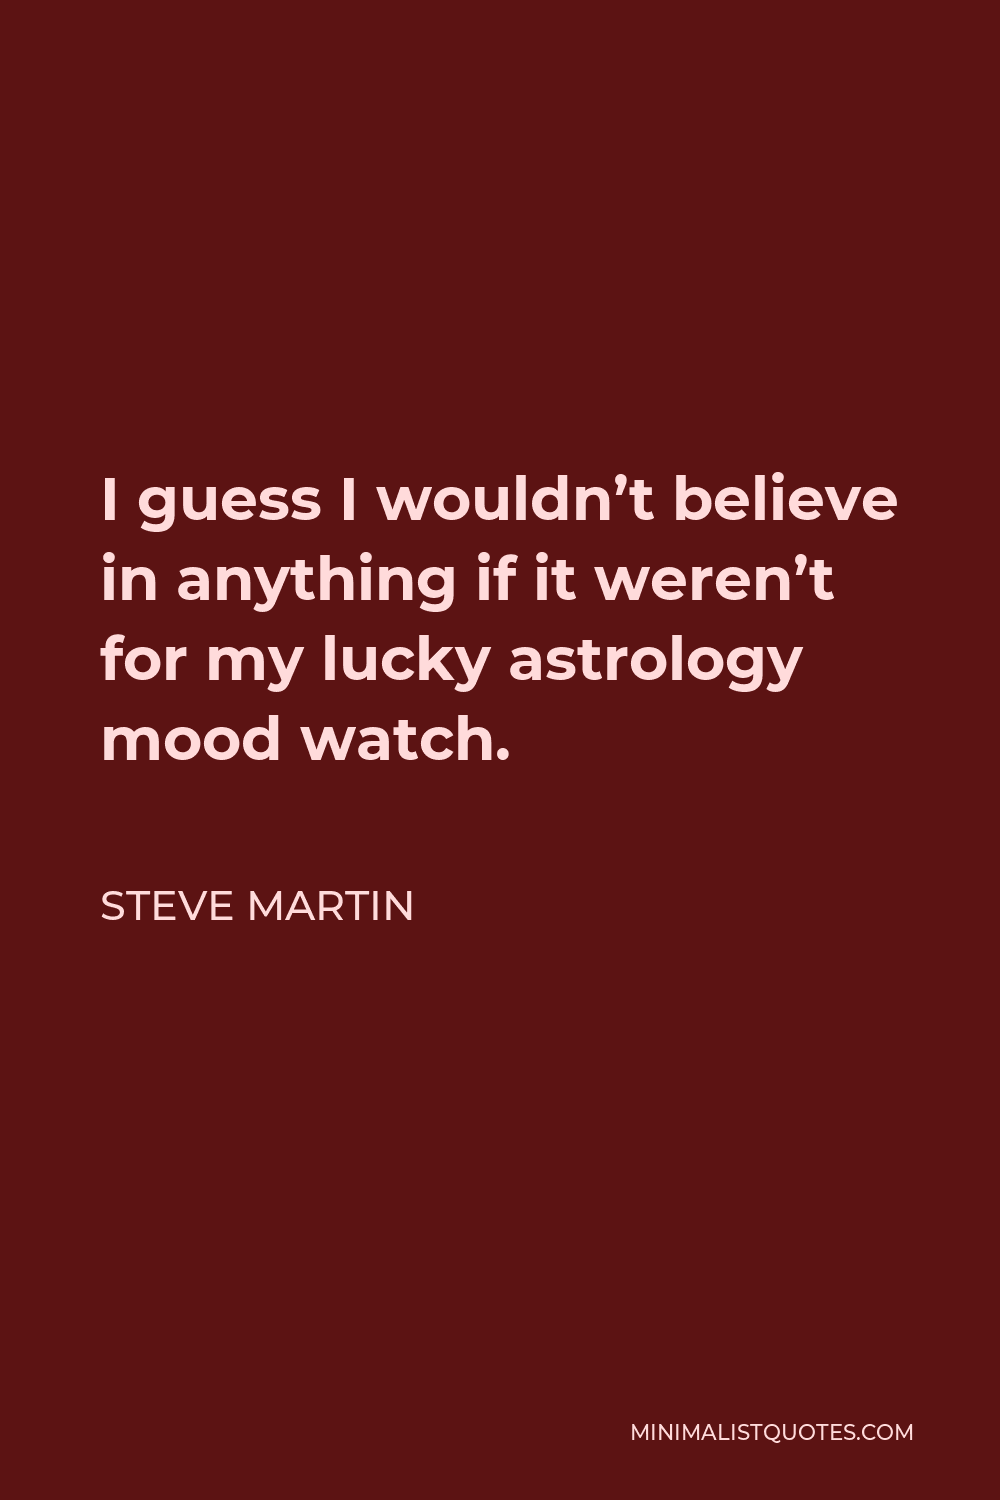 Steve Quote: I guess I wouldn't believe anything if weren't for my lucky astrology mood watch.